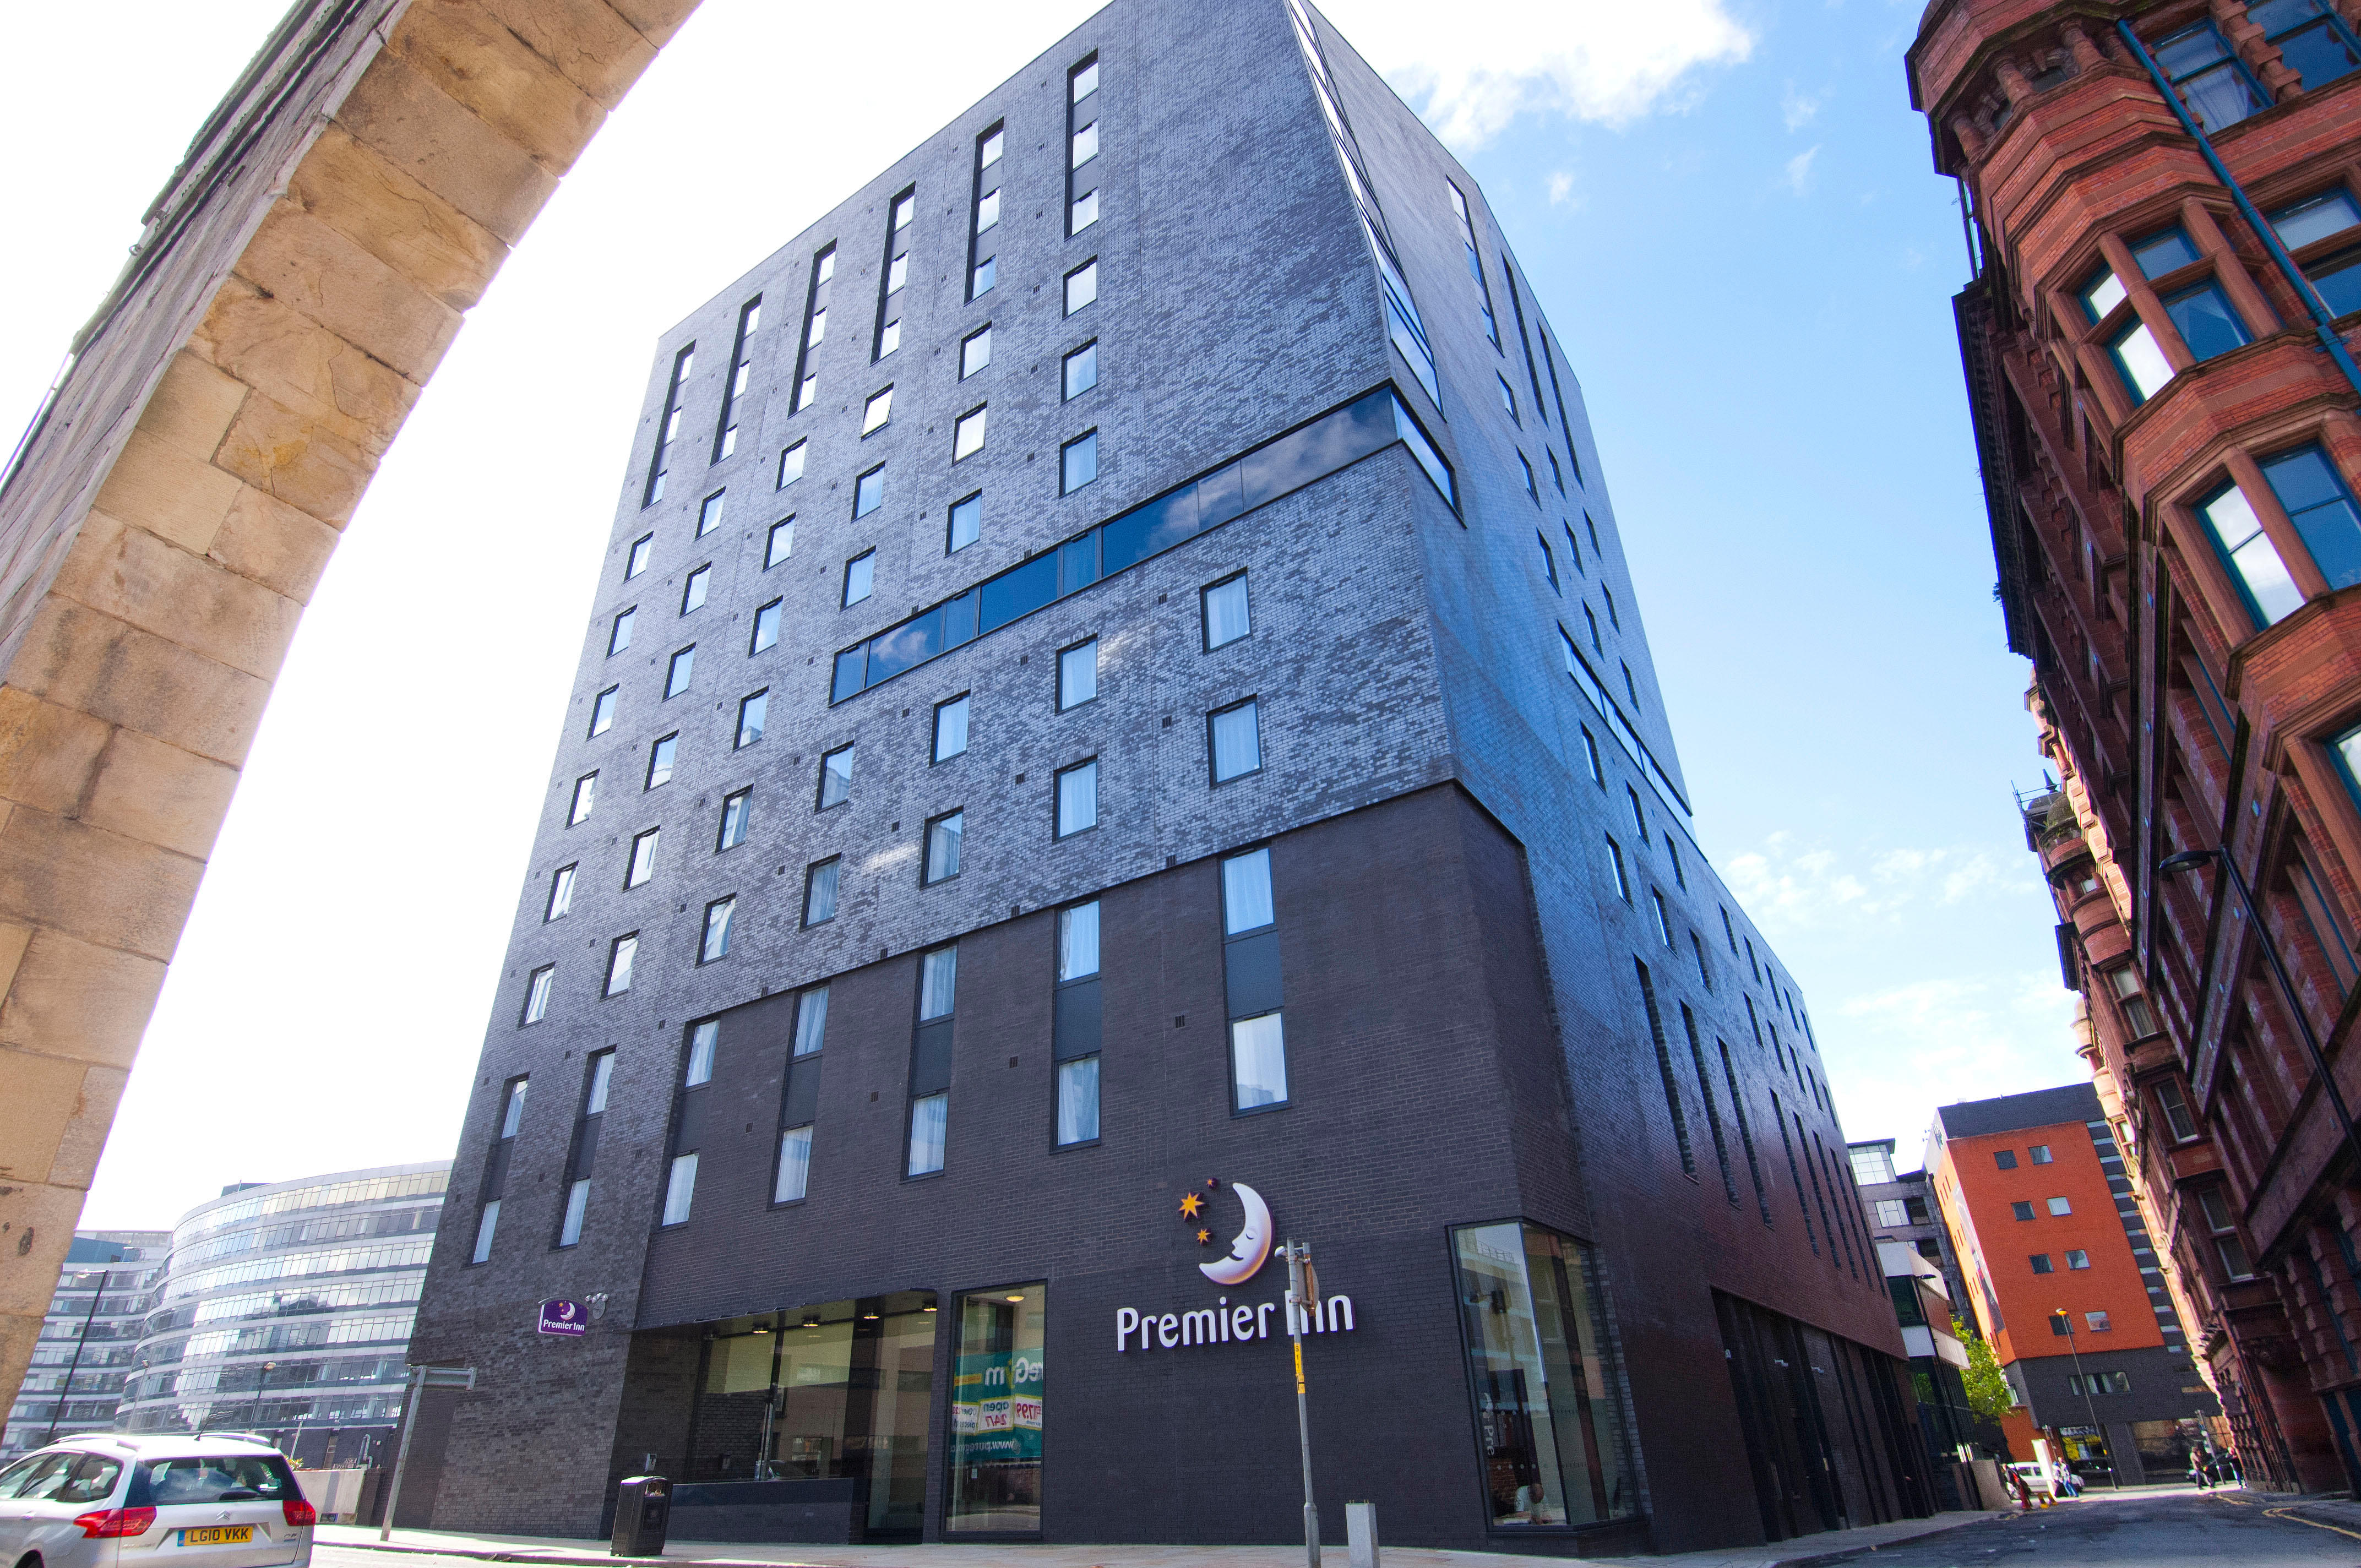 Premier Inn Manchester City (Piccadilly) hotel Premier Inn Manchester City (Piccadilly) hotel Manchester 03333 219286